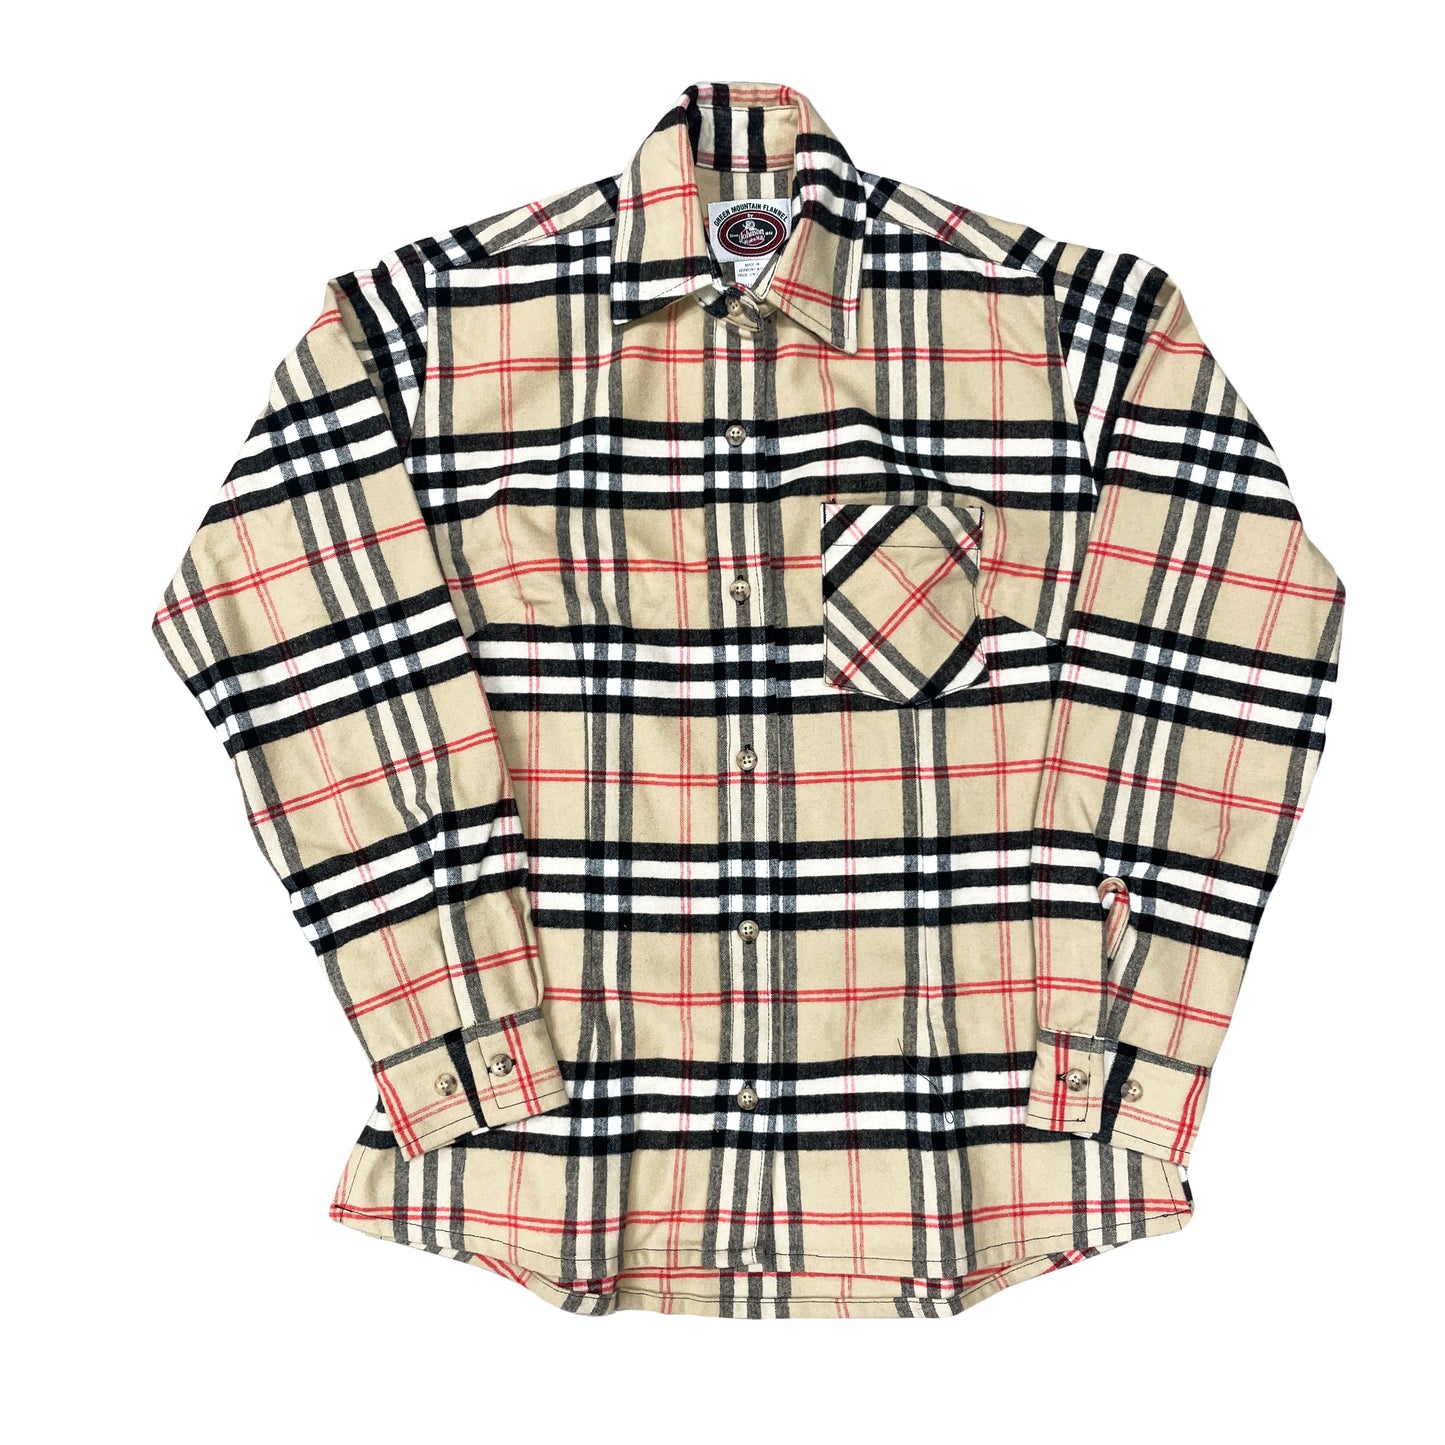 Green Mountain Flannel long sleeve button down shirt with 1 chest pocket, long tail and button cuffs. Shown in tan, red, black and white plaid.